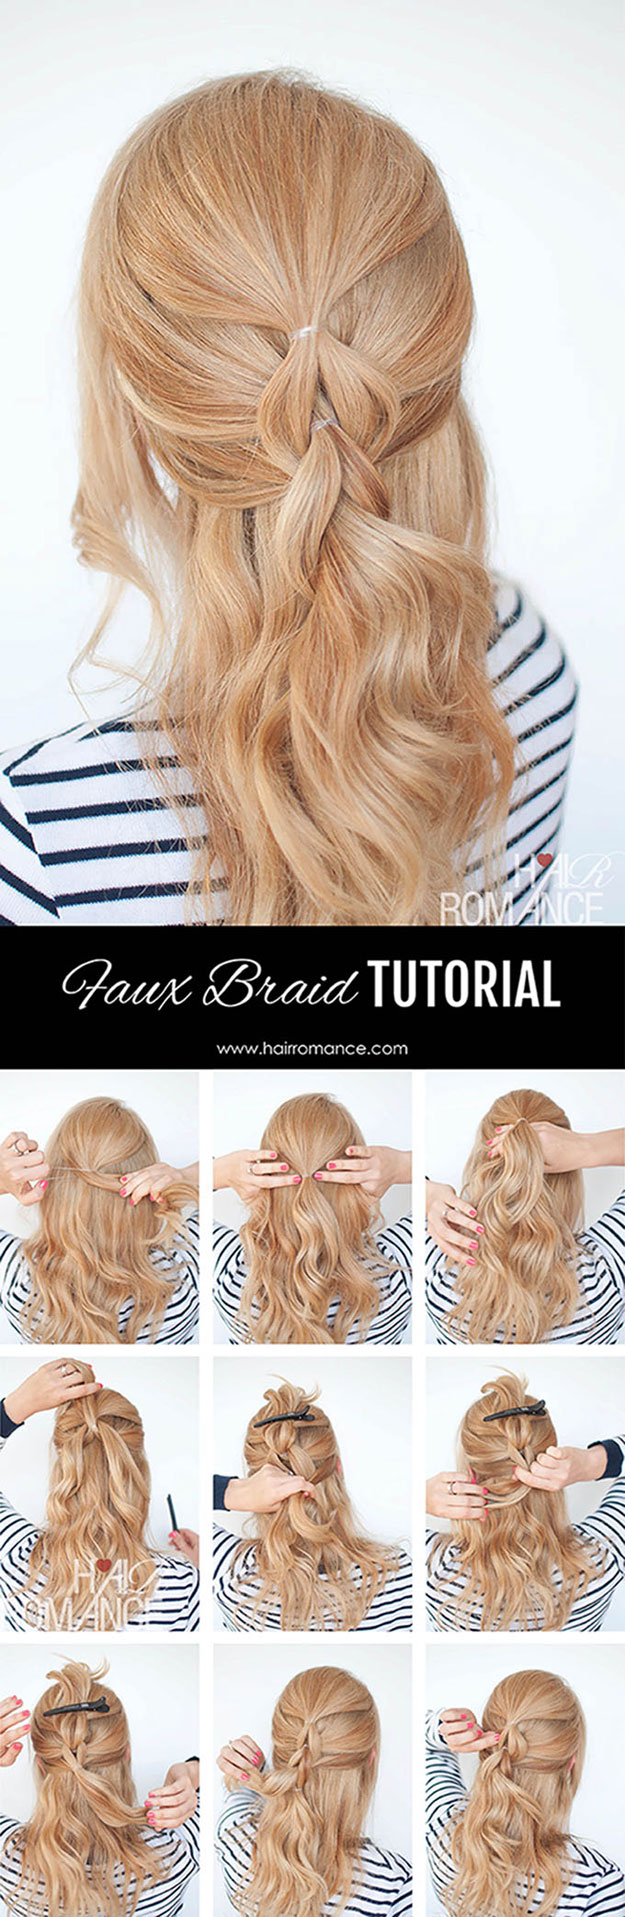 Quick Hair Styles That Are Easy - Hair Tutorials With Step by Step Instructions - Faux Braid Tutorial - Cool Hairstyles for Teens and Adults - Faux Braids